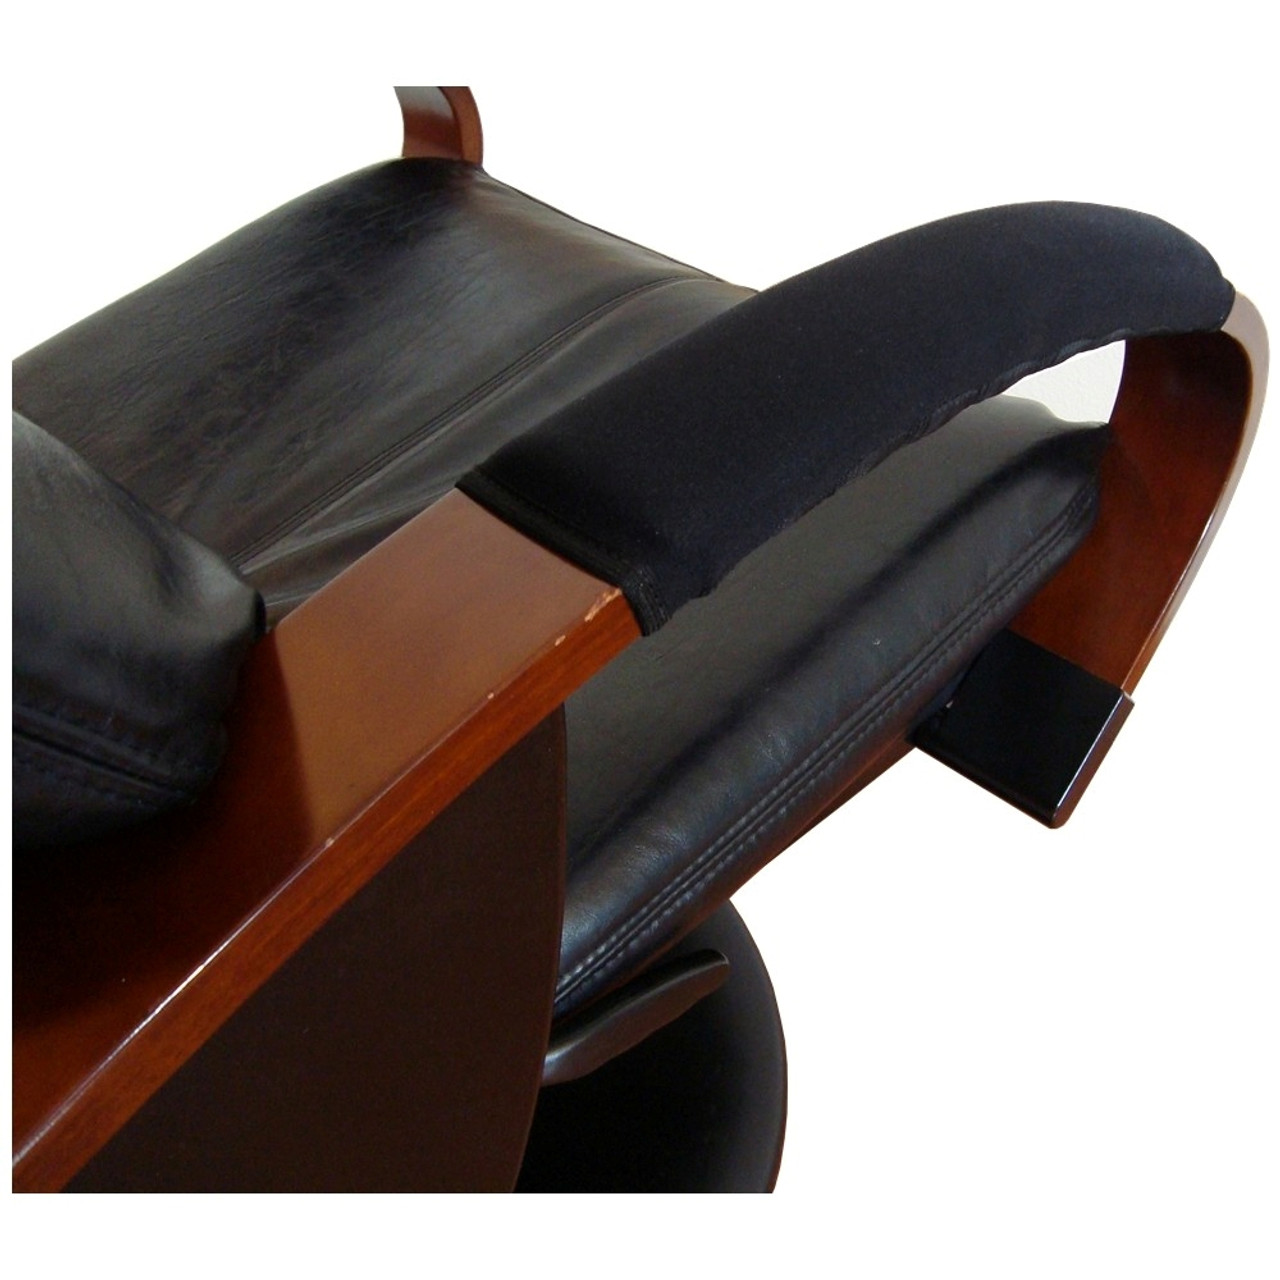 Up To 80% Off on 2pcs Office Chair Armrest Cov